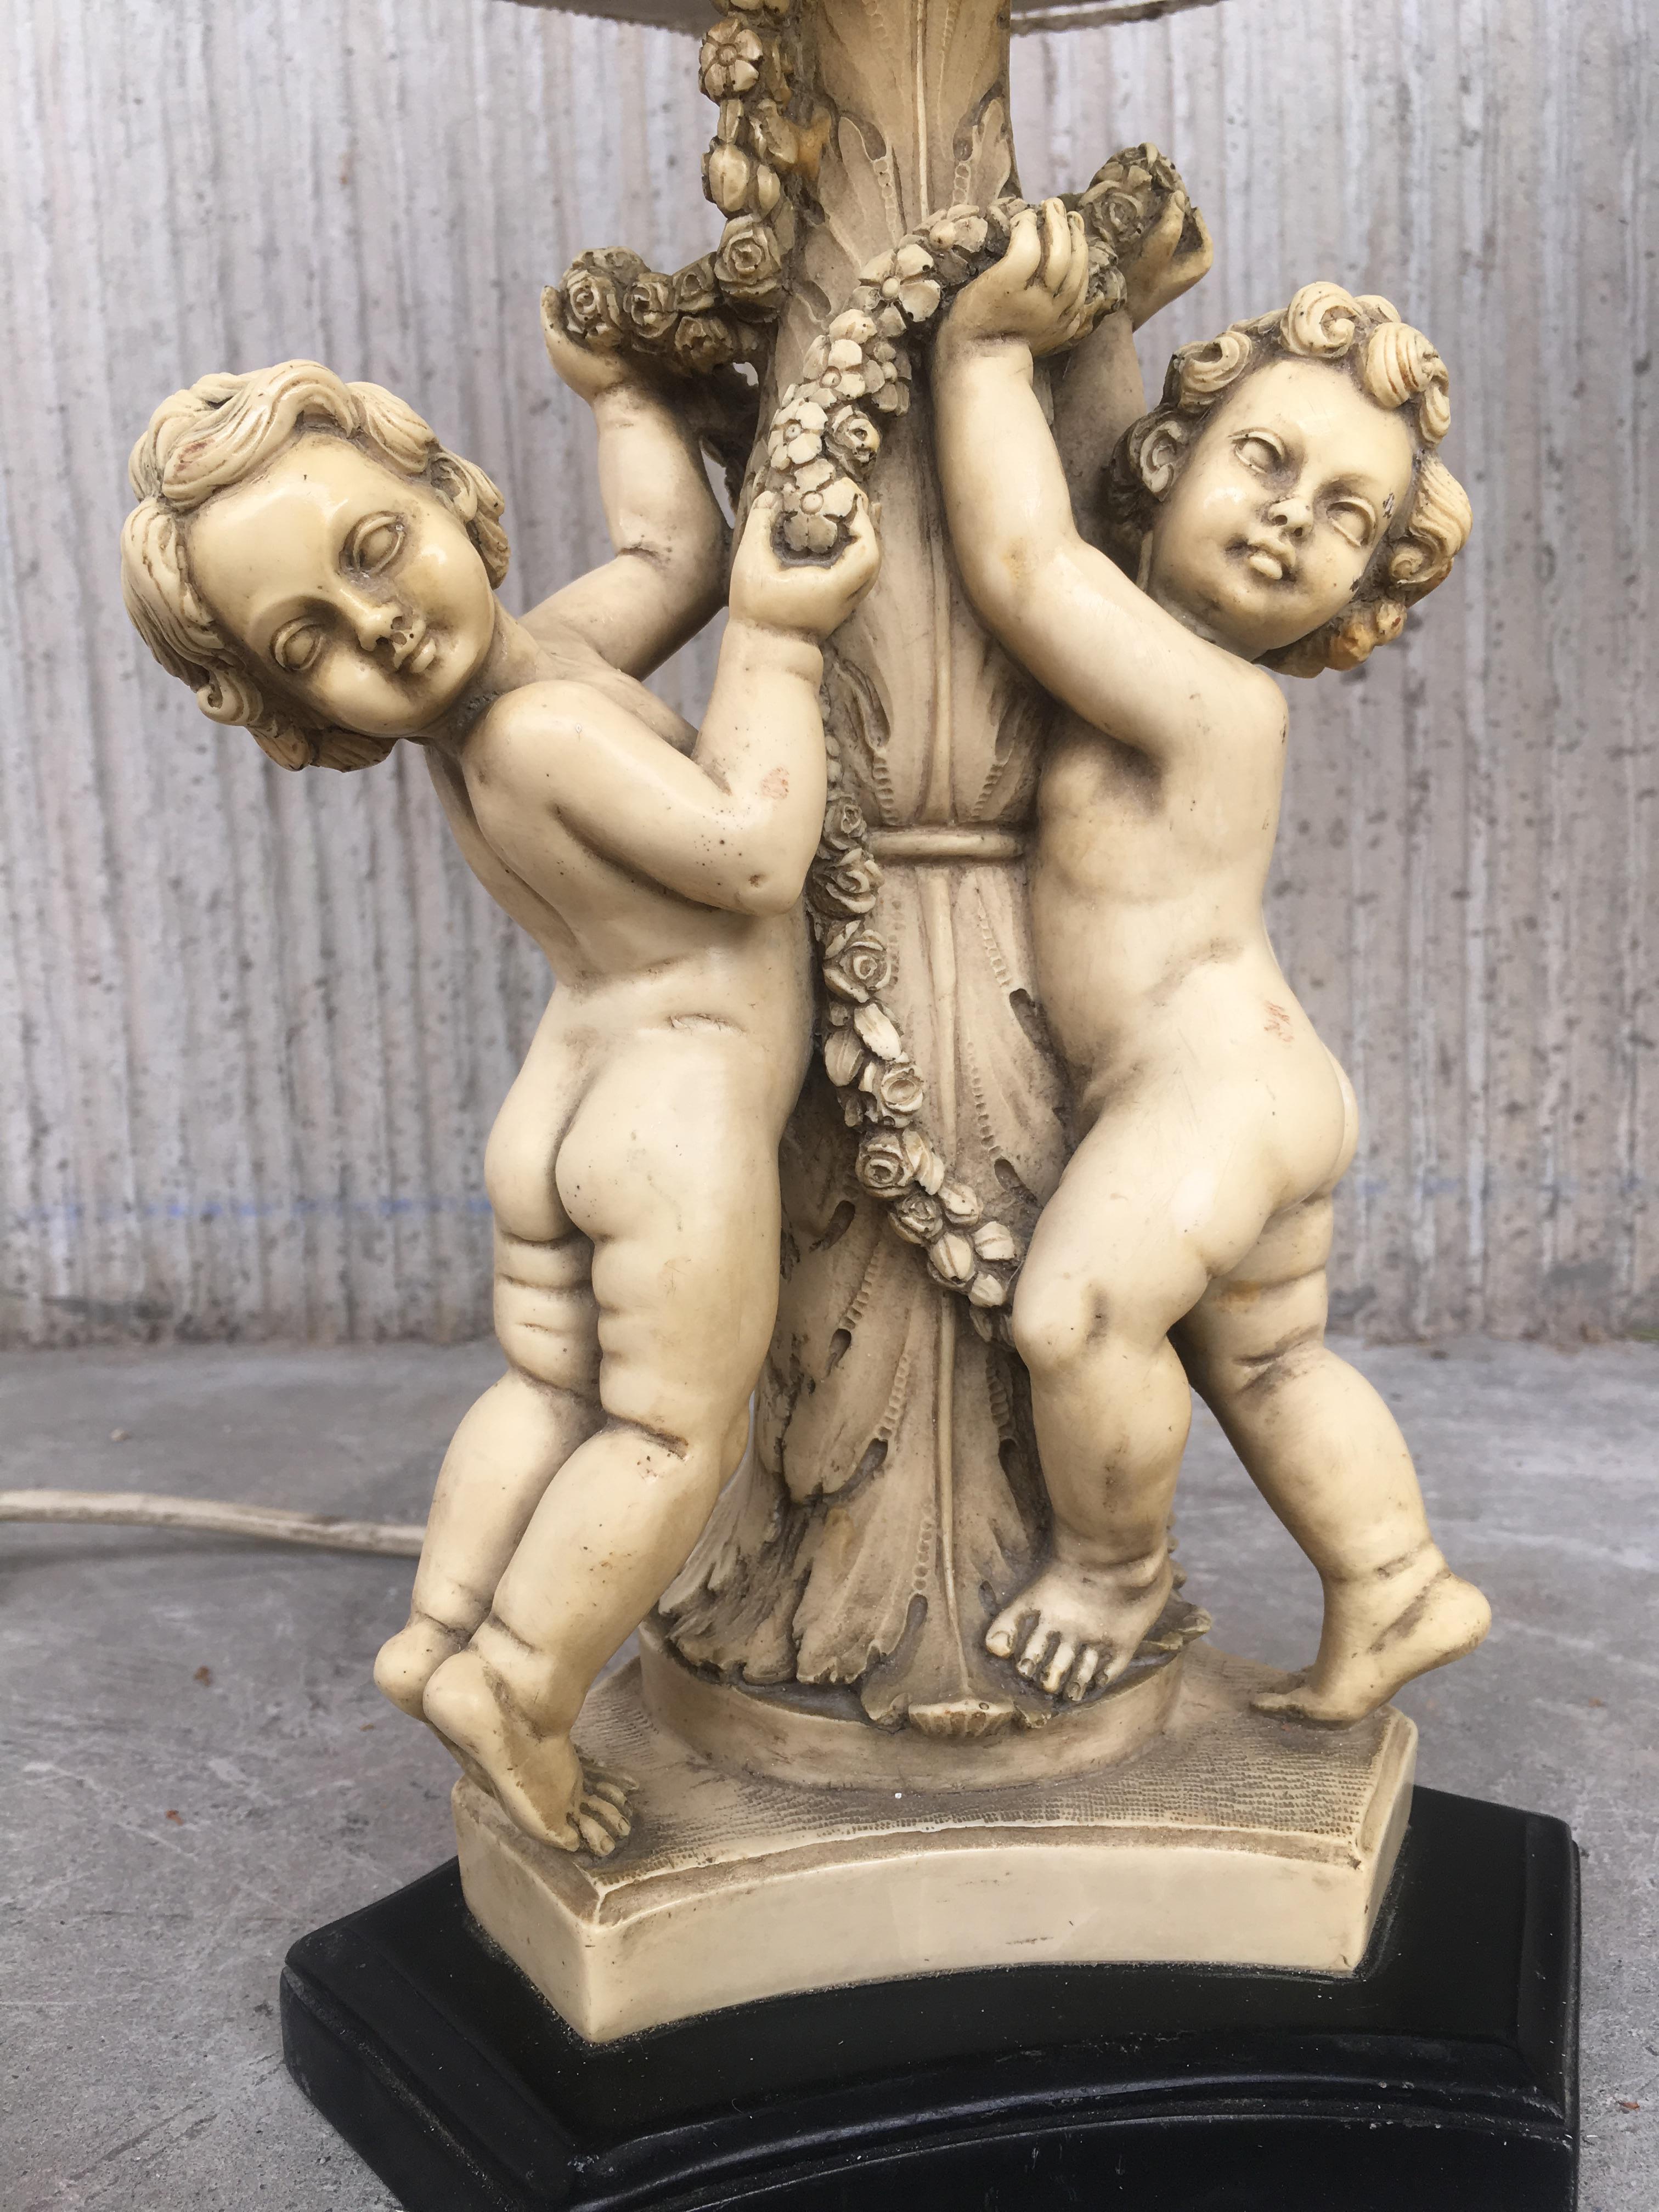 20th Century Pair of White Resin Cherub Lamps on Wooden Bases by G. Ruggeri For Sale 1